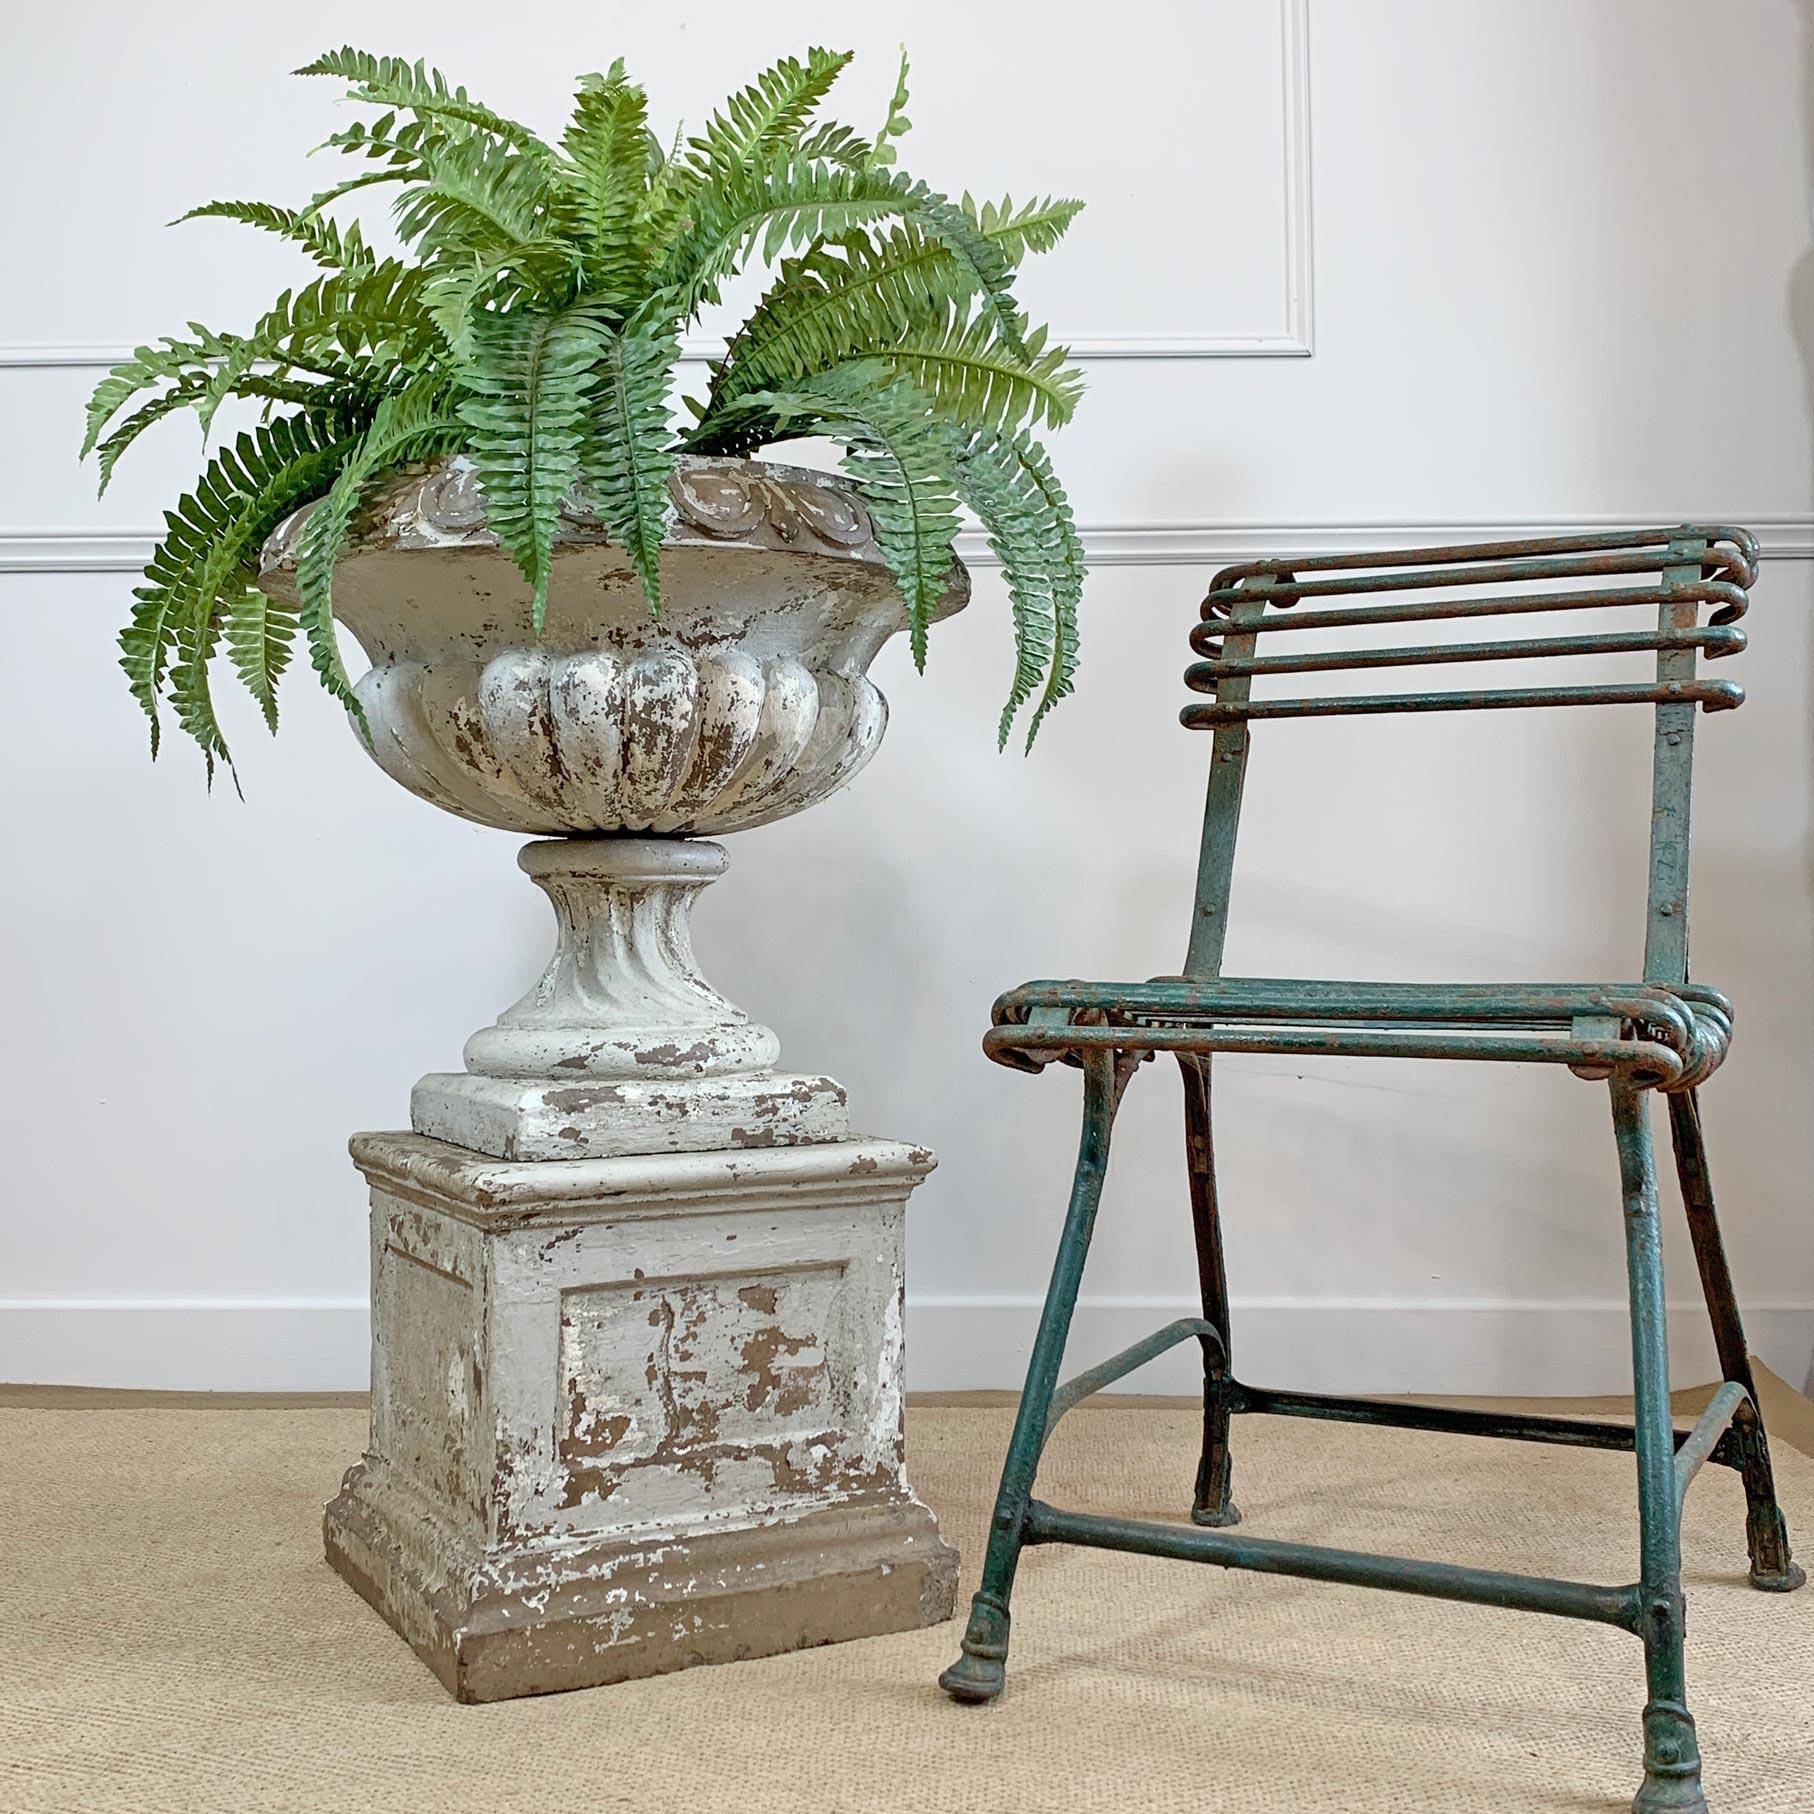 Late 19th-early 20th century terracotta tazza urn and plinth
This urn is in buff terracotta with weathered white paint and natural green tones from age and outdoor living
The urn is in 3 sections, bowl, stem and plinth. There is a historic chip to